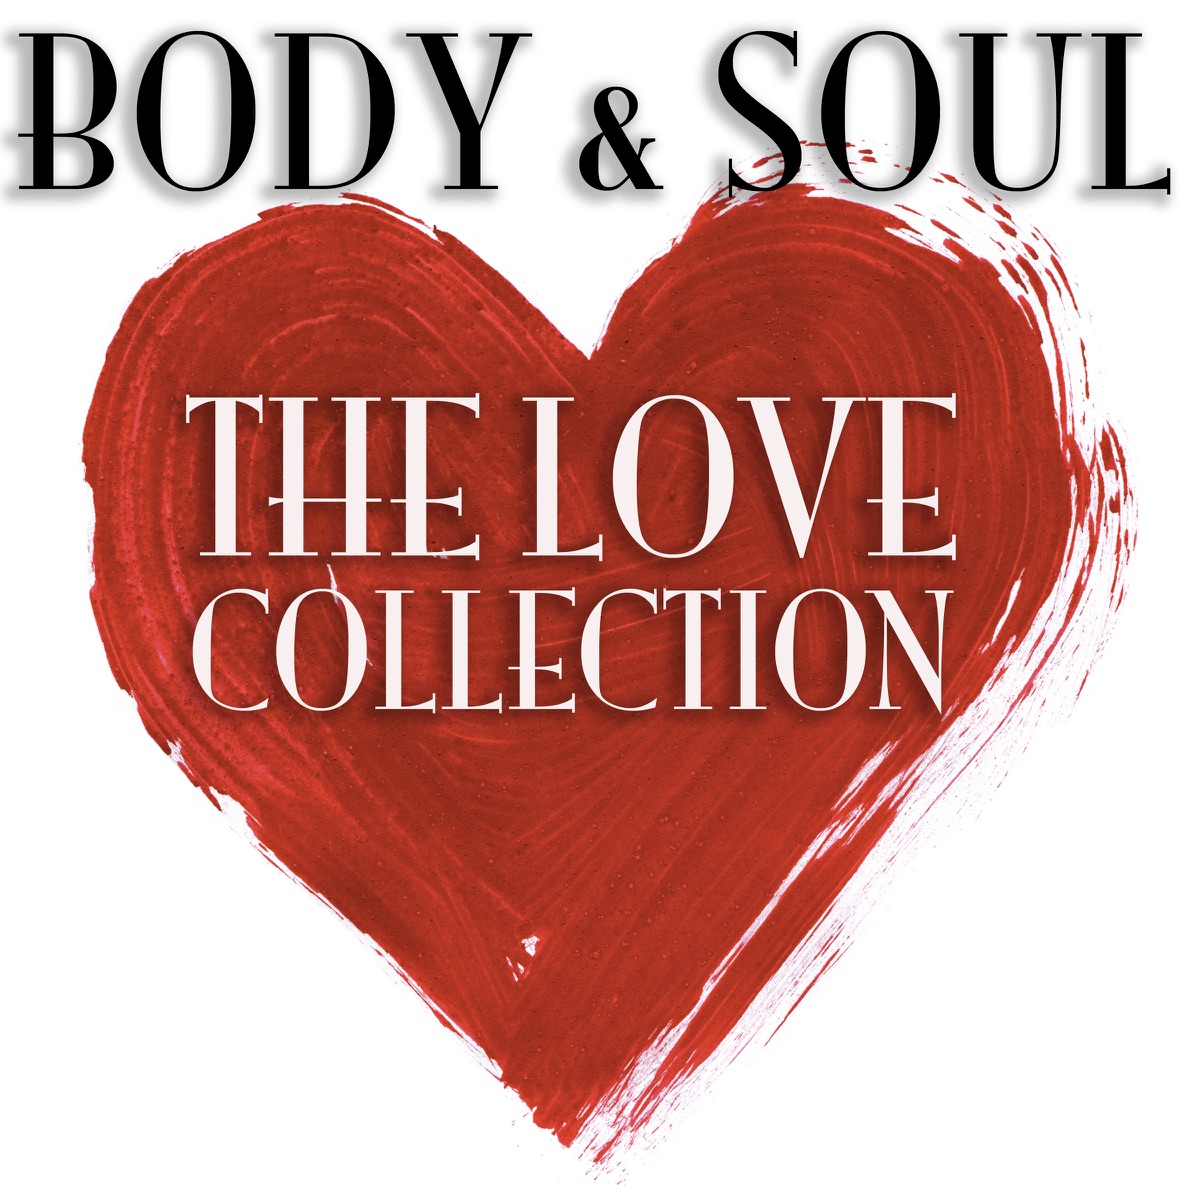 Body & Soul: The Love Collection - Album by Various Artists - Apple Music